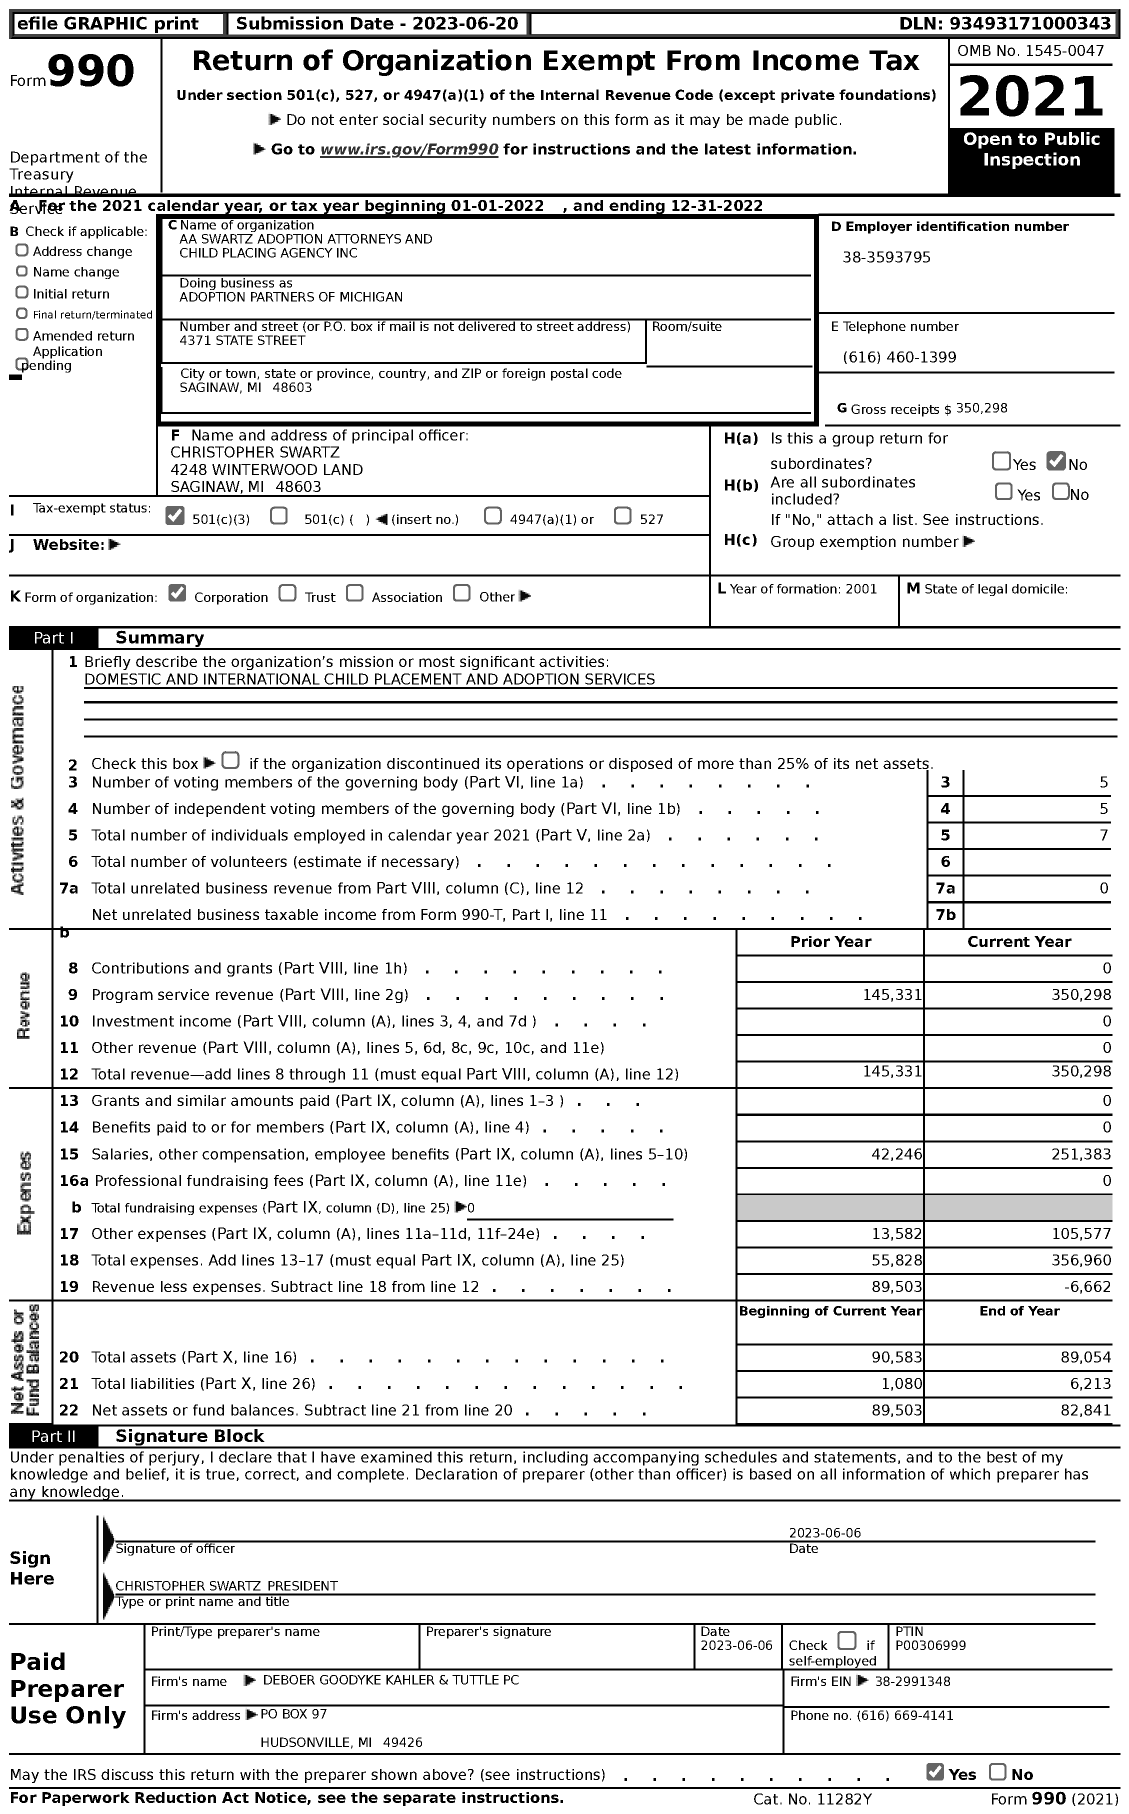 Image of first page of 2022 Form 990 for Adoption Partners of Michigan